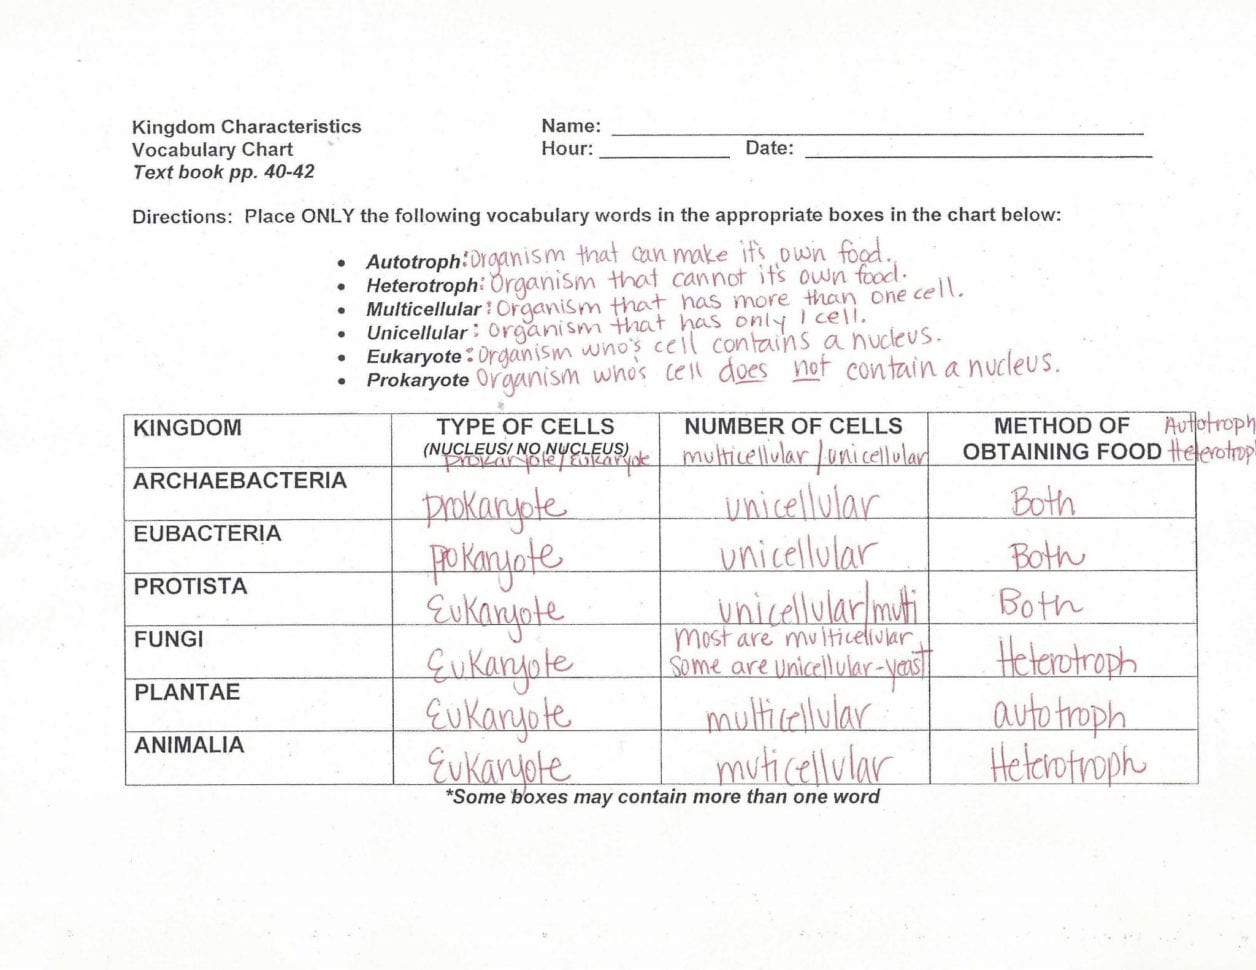 Dna Mutation Practice Worksheet Answers